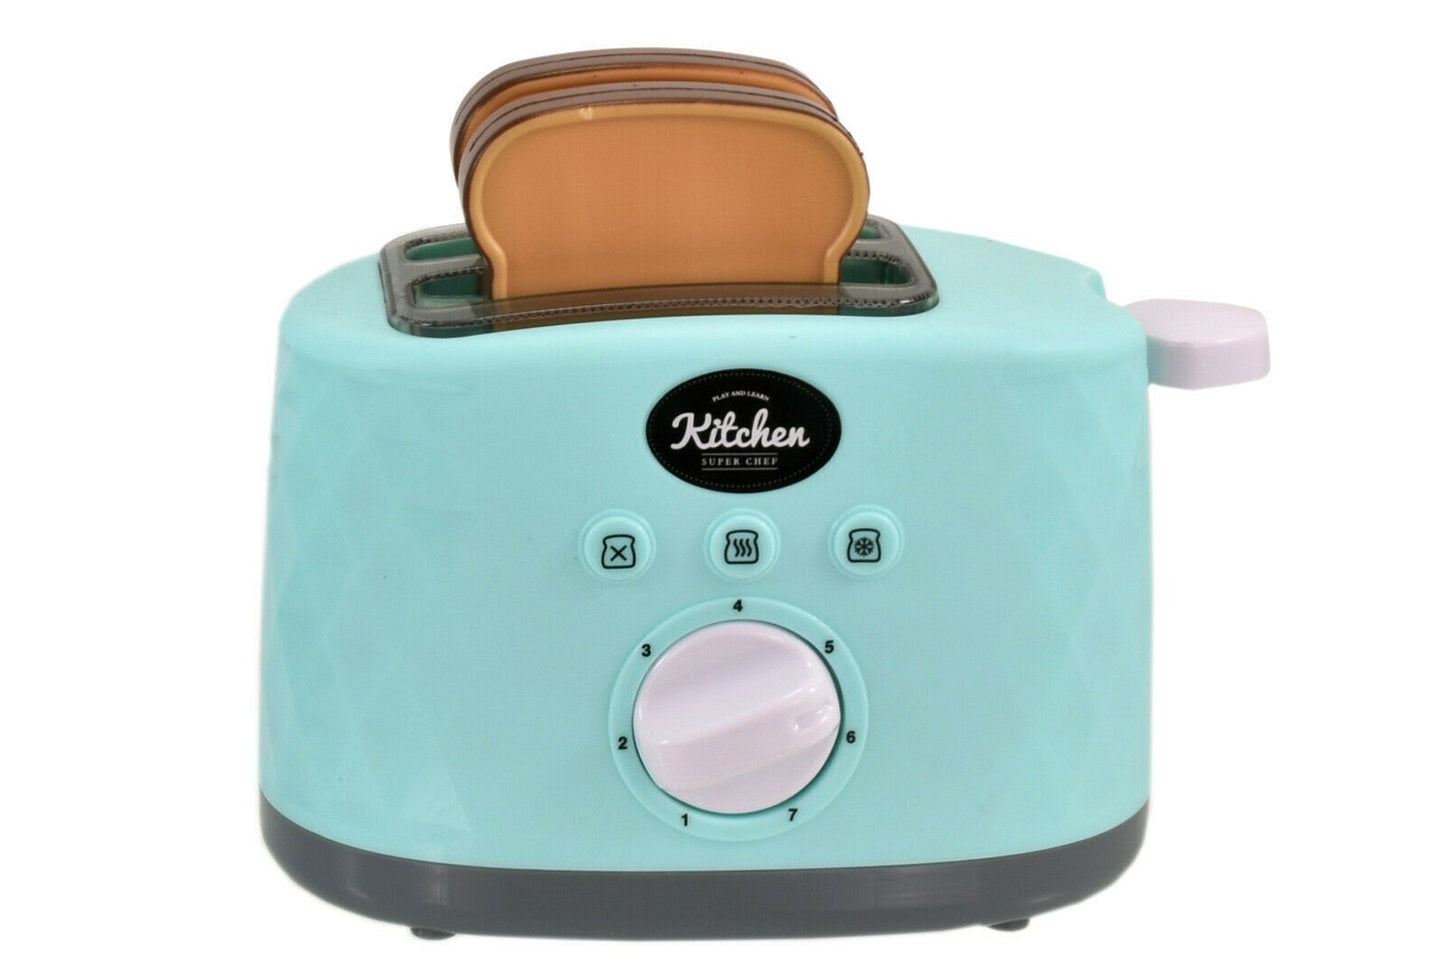 My First Toaster, Play And Learn-almanaar Islamic Store